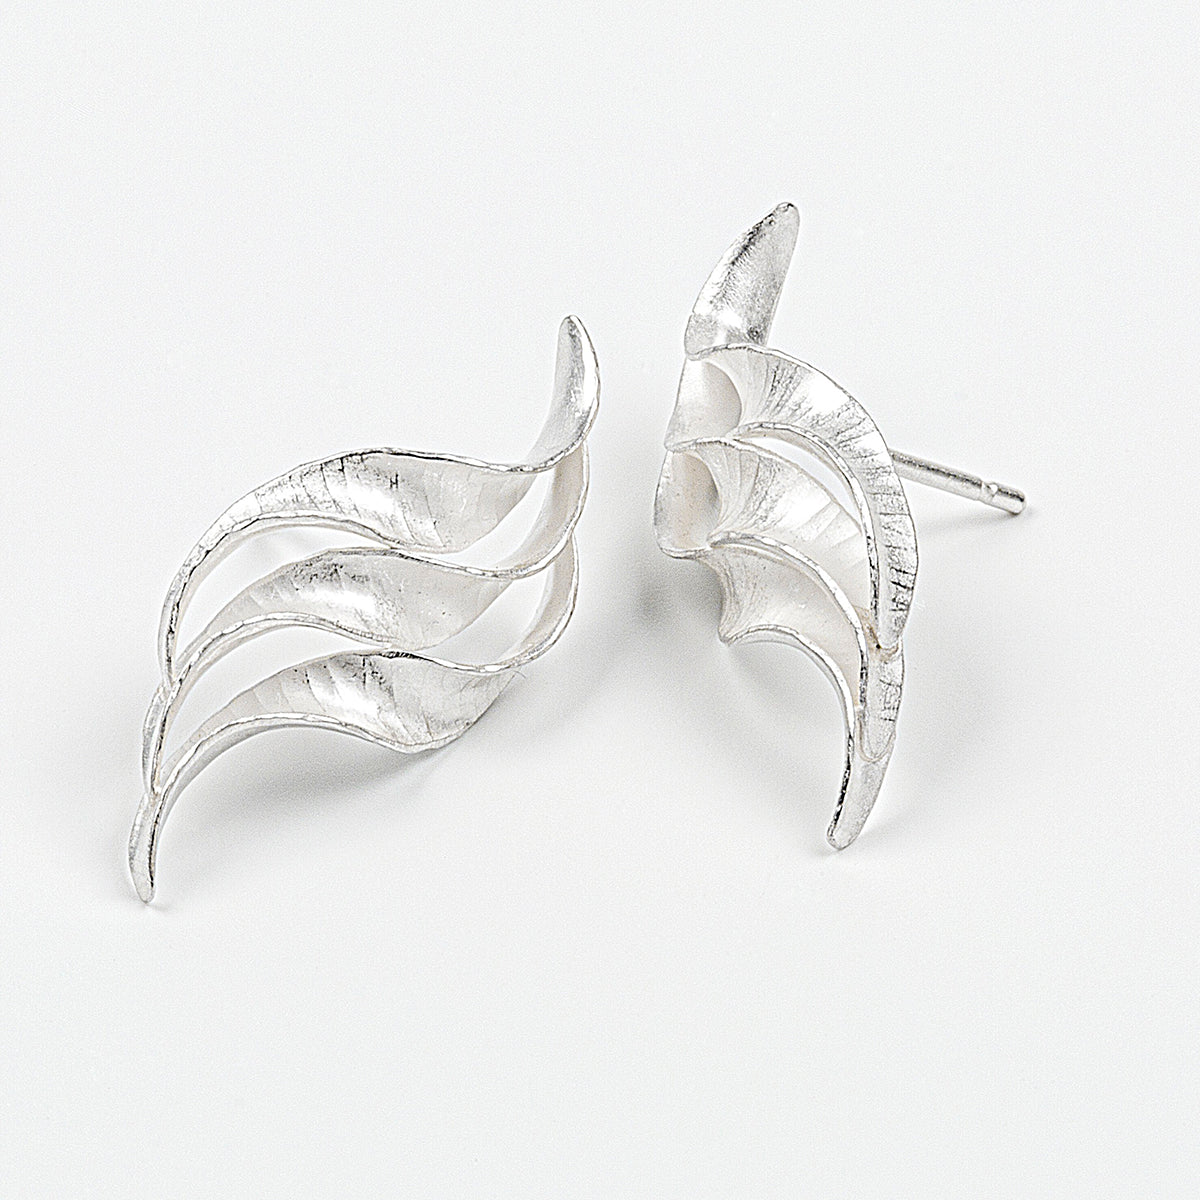 A pair of silver wedding earrings in the form of a triple wave of parallel curling, twisting S-shapes. They have a hammered texture, non-reflective surface and burnished edges.  This view shows the two studs turned slightly to face one another.